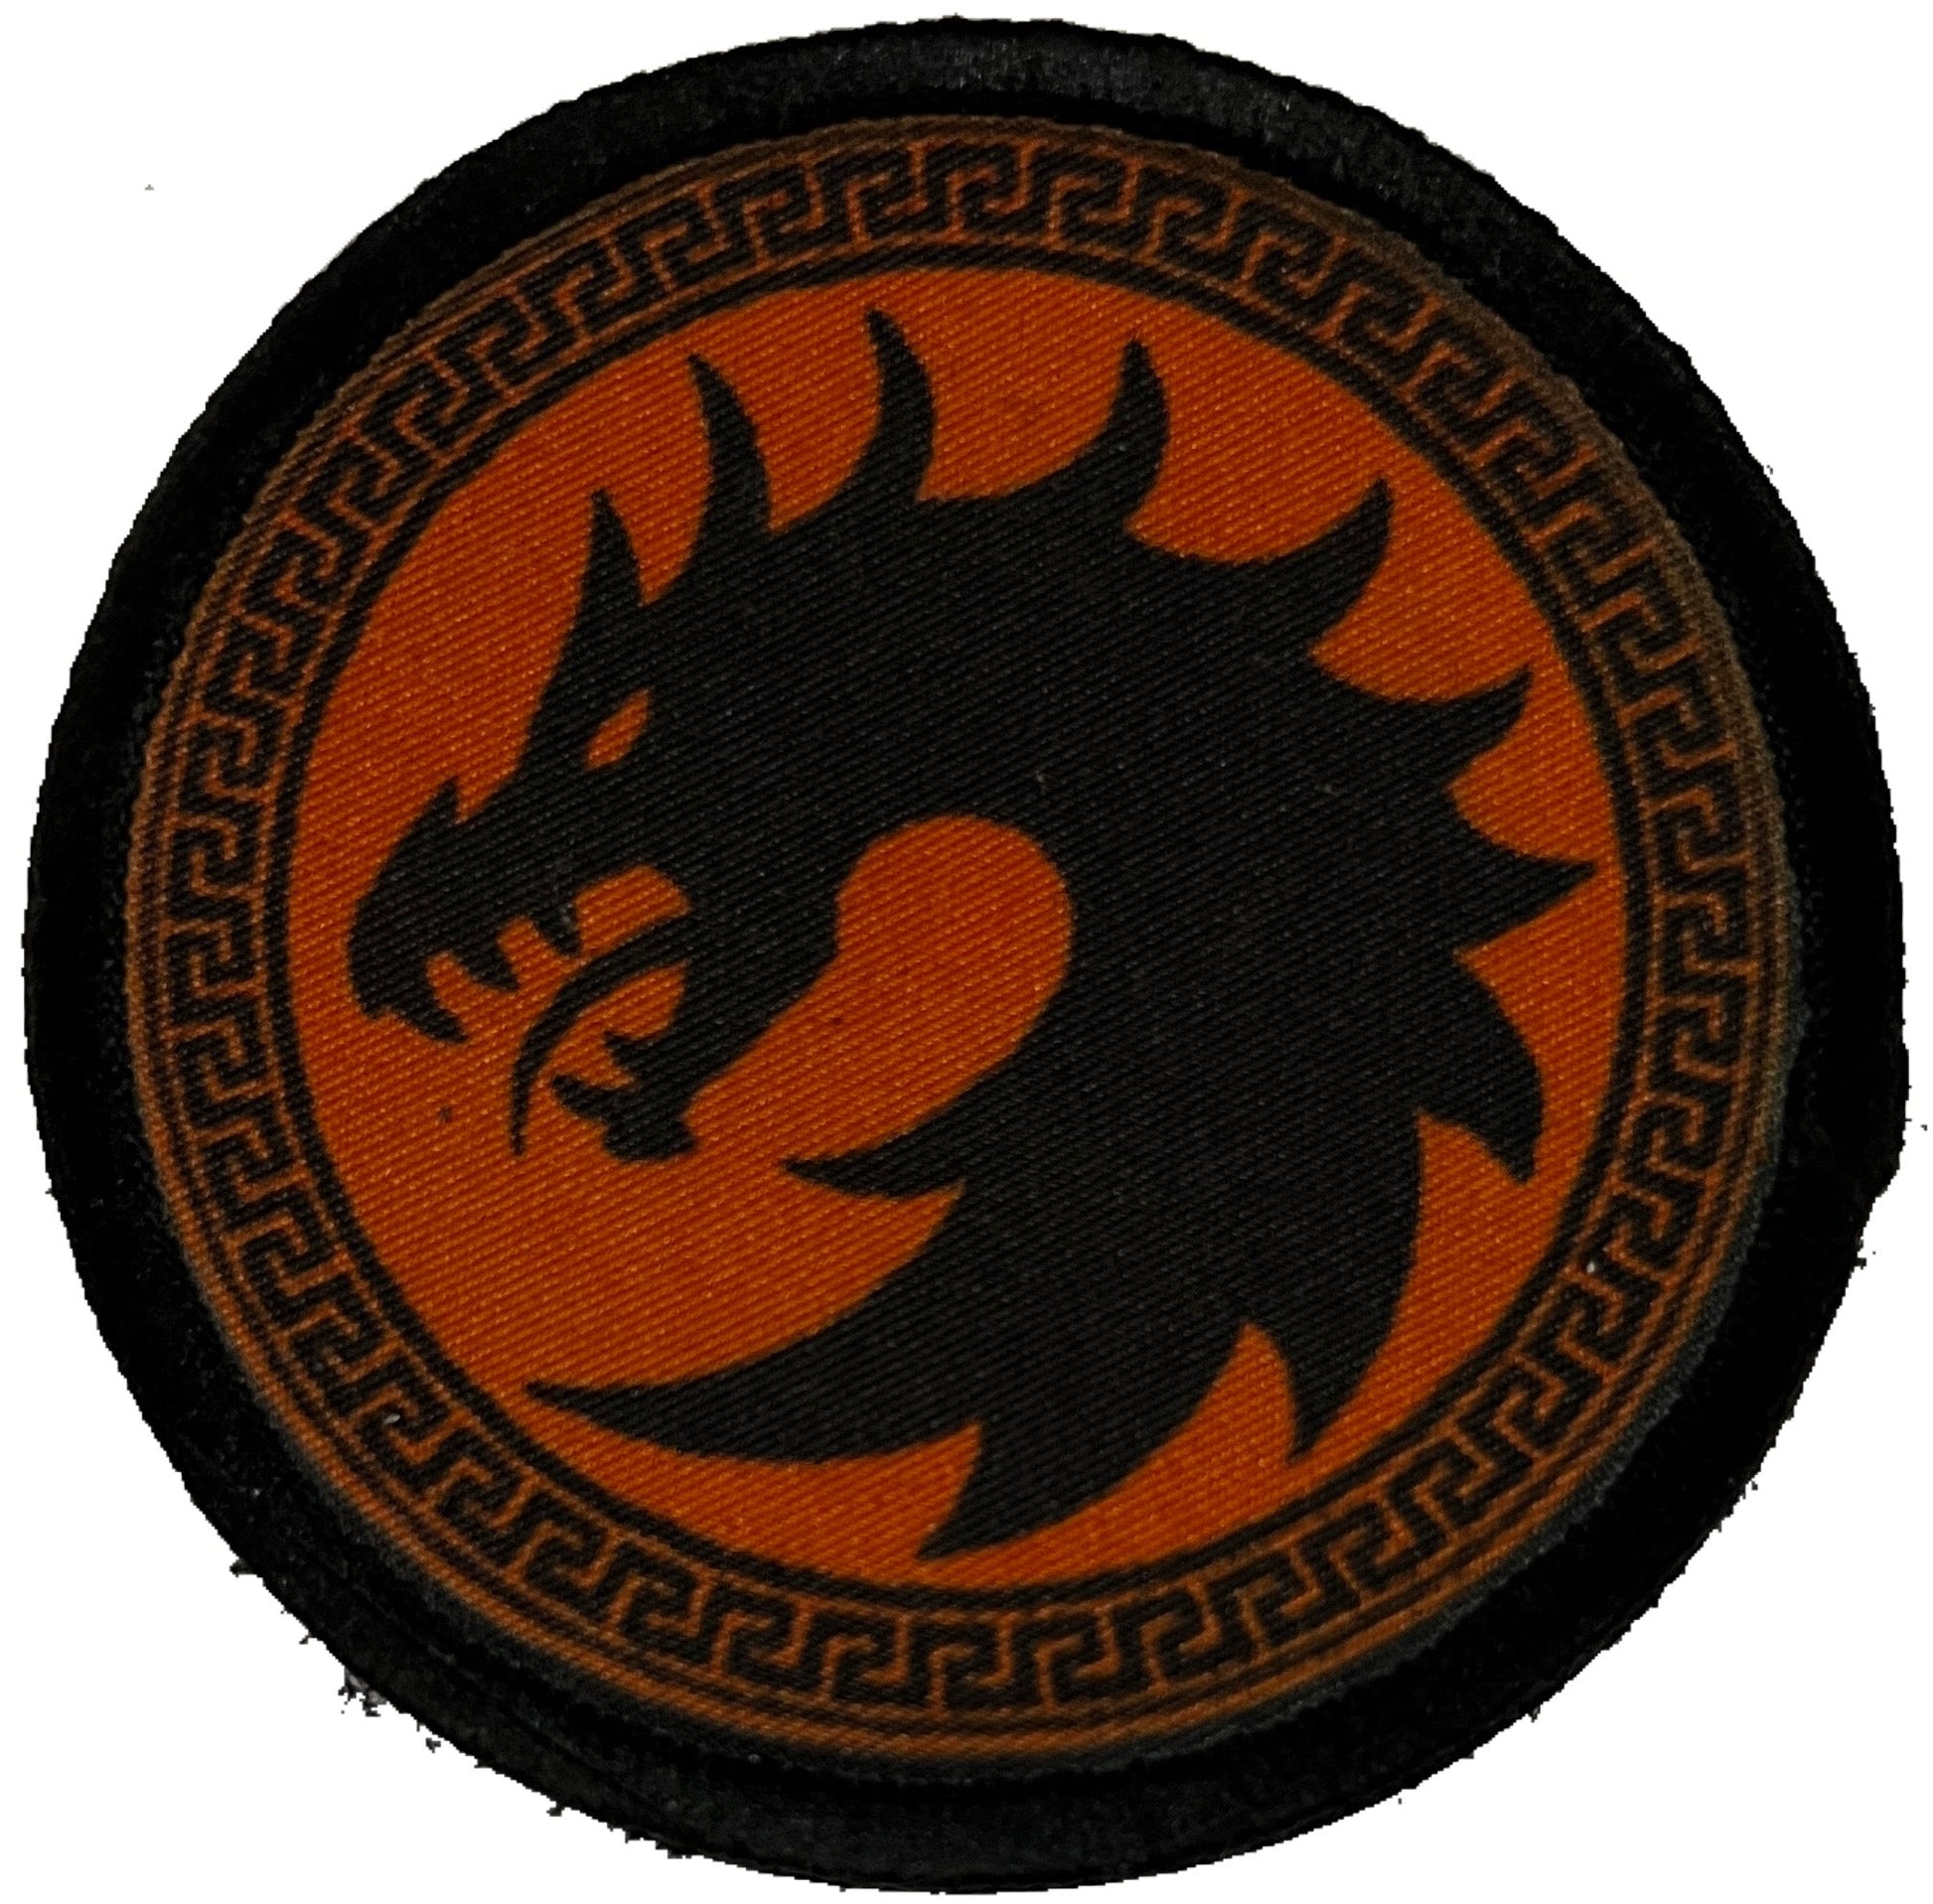 3" Dragon Army Ender's Game Morale Patch Morale Patches Redheaded T Shirts 